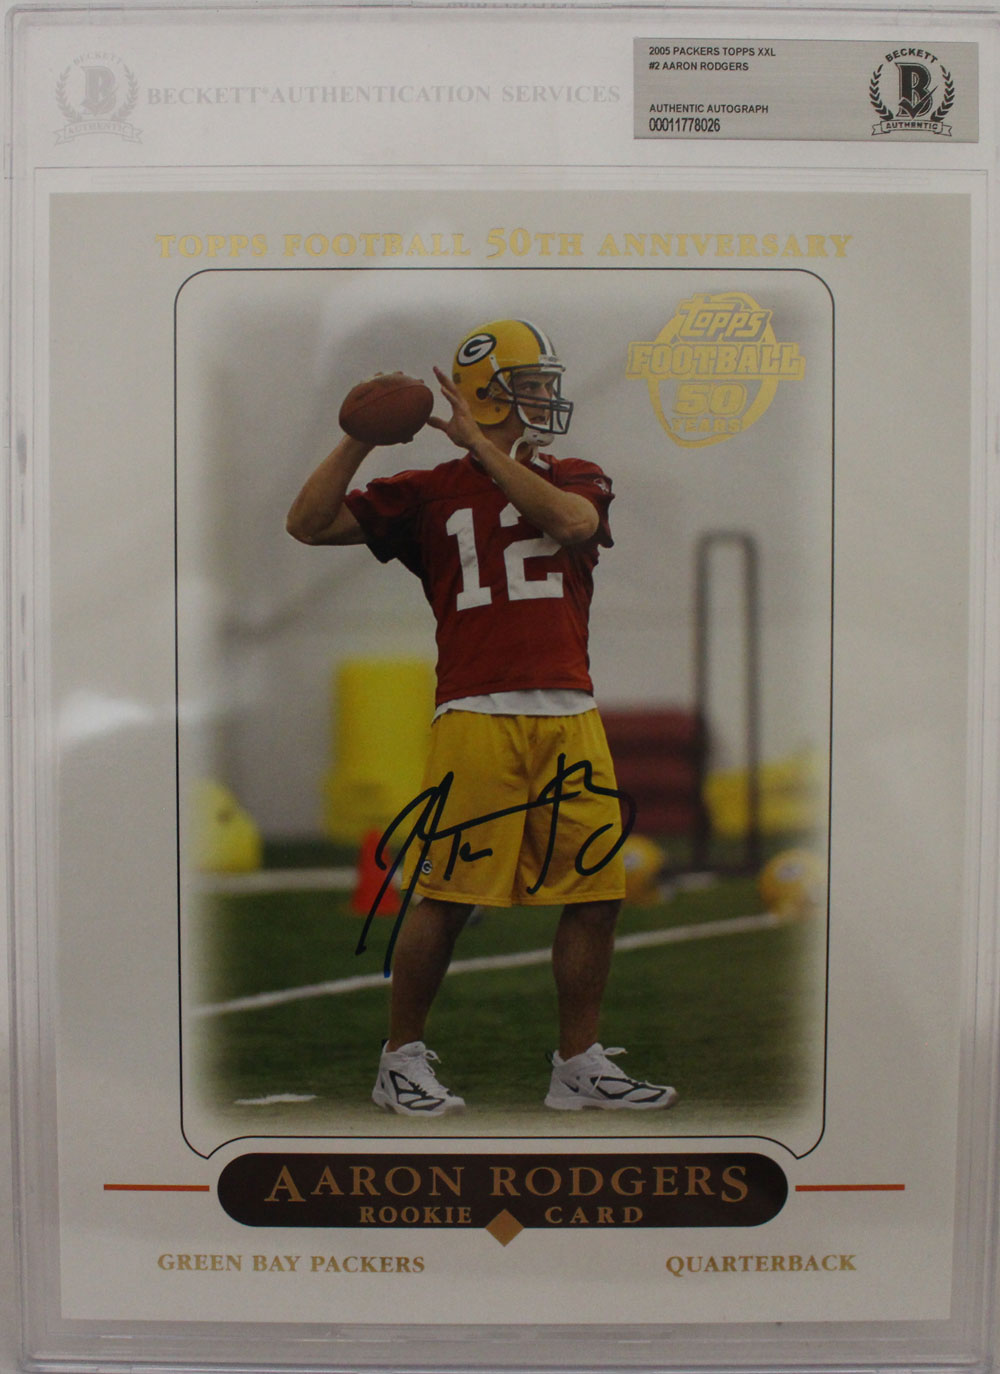 Aaron Rodgers Autographed Green Bay Packers 2005 Topps XXL Card BAS Slab 27316